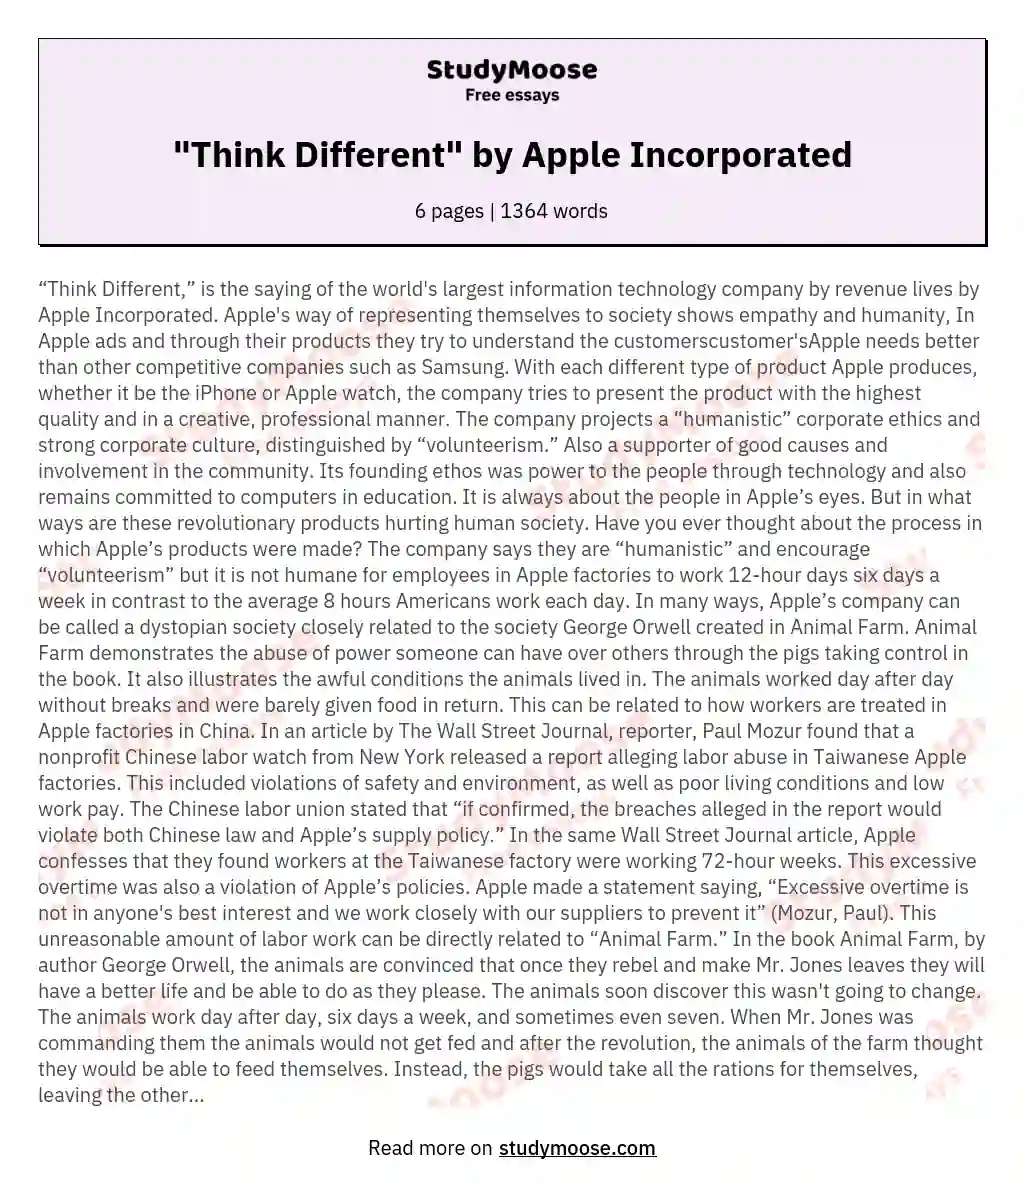 "Think Different" by Apple Incorporated essay